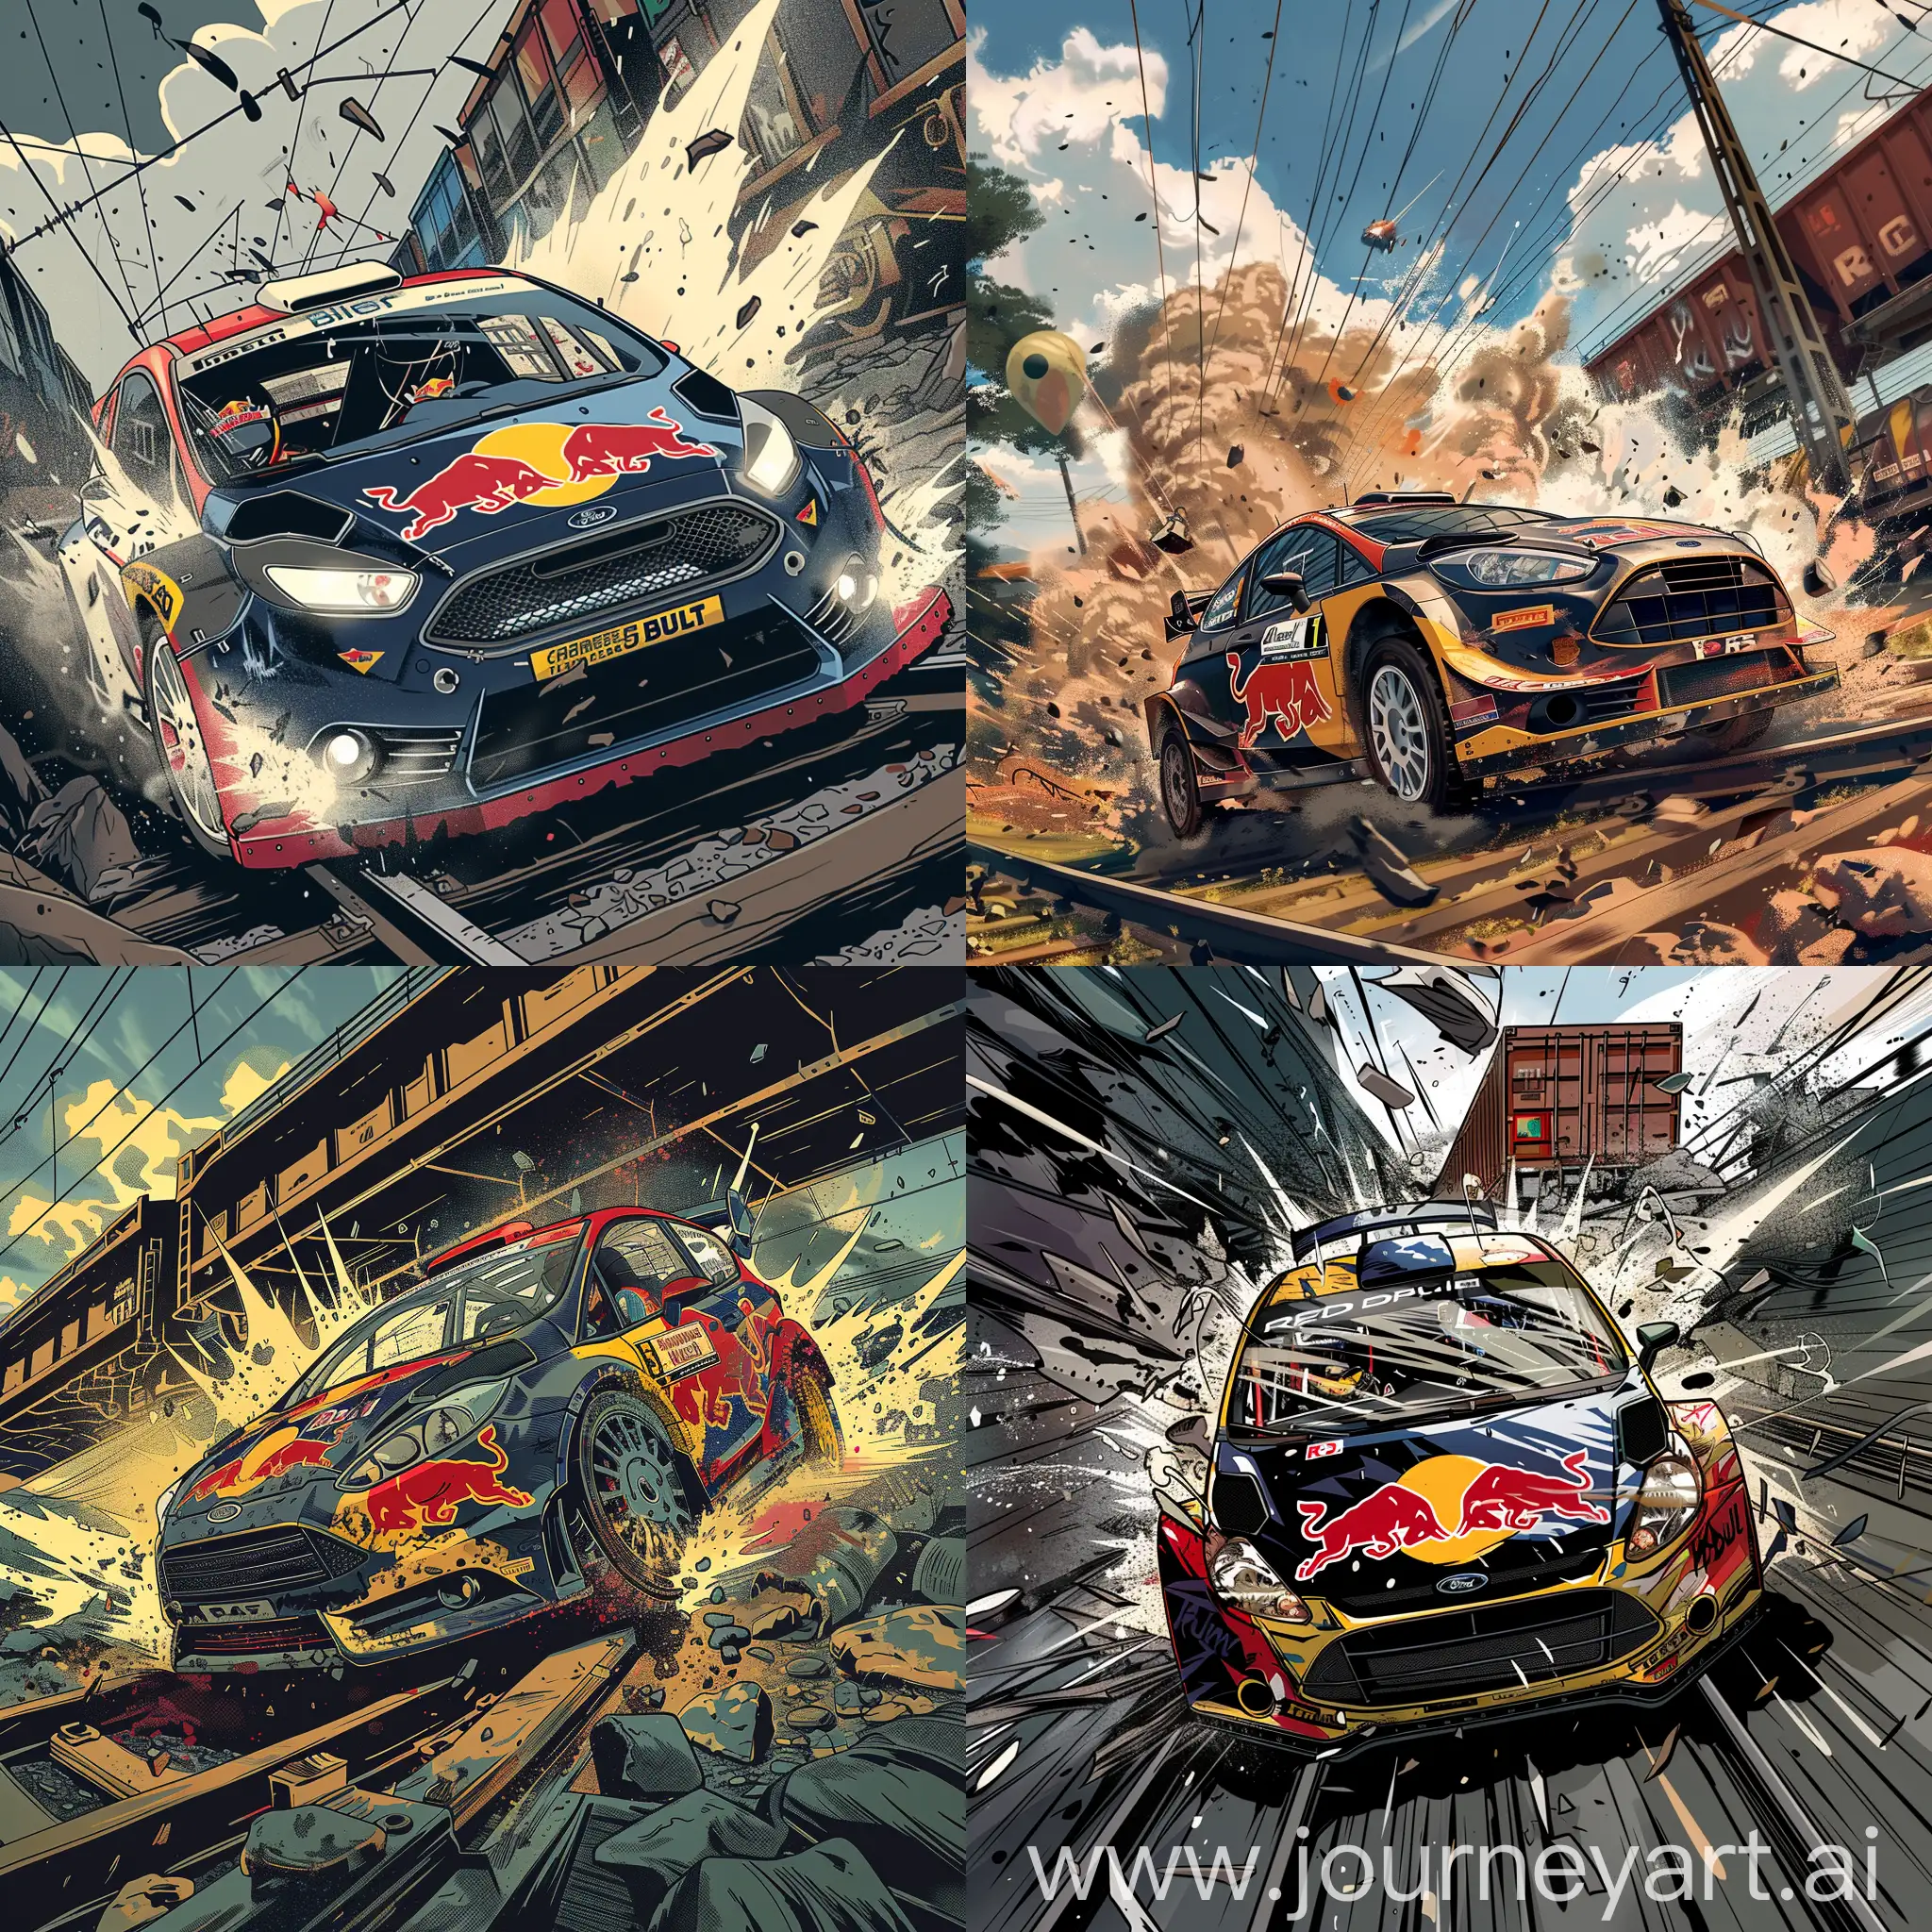 A ford fiesta r5 with a red bull livery being driven by a rally car driver with his co driver in his side, both wearing a red bull full face helmet and a racing suit, the car is being hit by a freight train and the car is wrecked and is about to explode, the driver is visible in the picture with a shock eye, in a manga art style